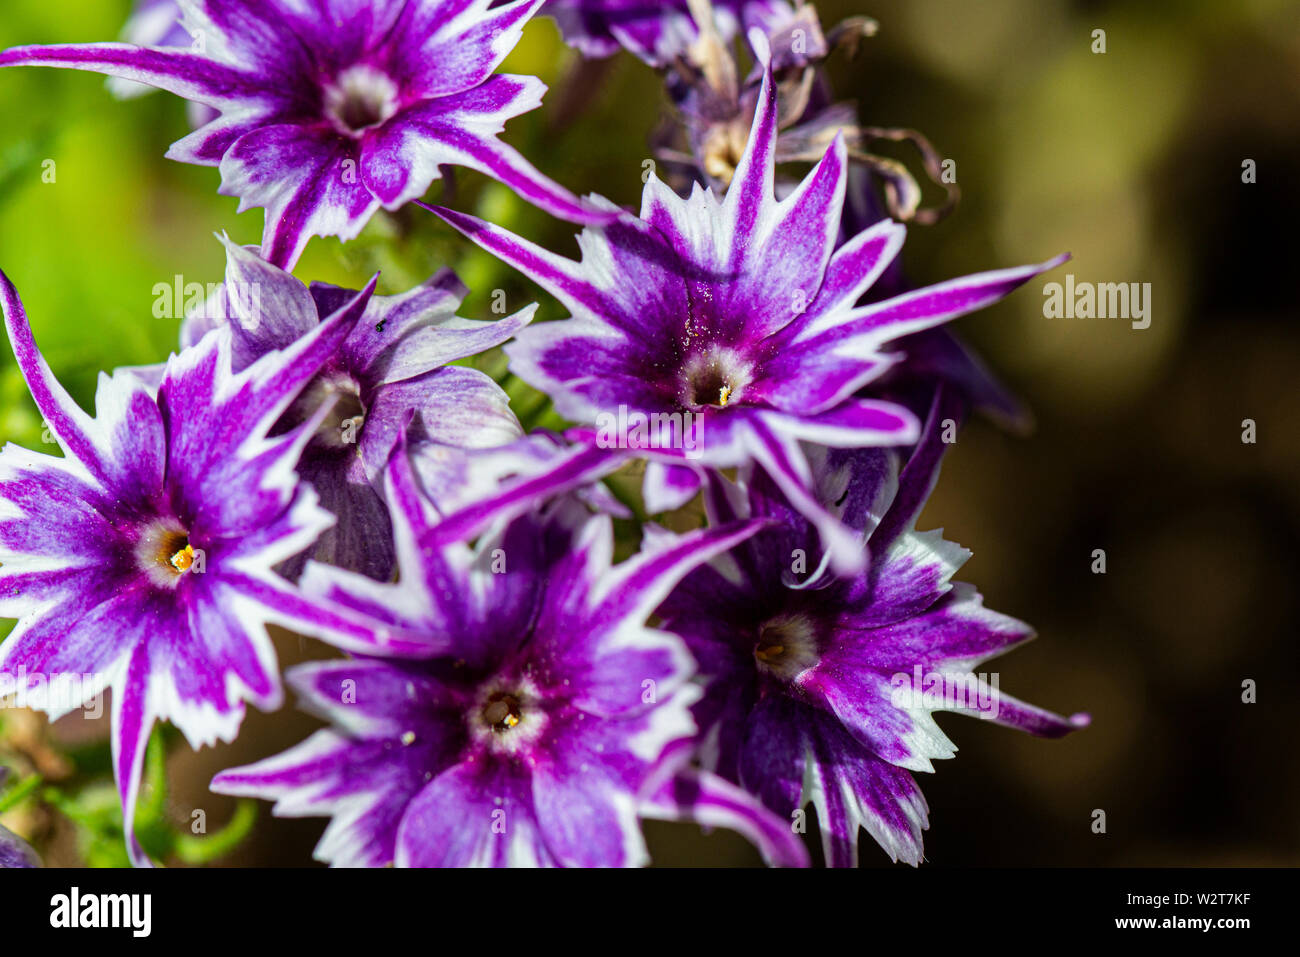 A close up of the flowers of a Phlox drummondii Popstars Mixed Stock Photo